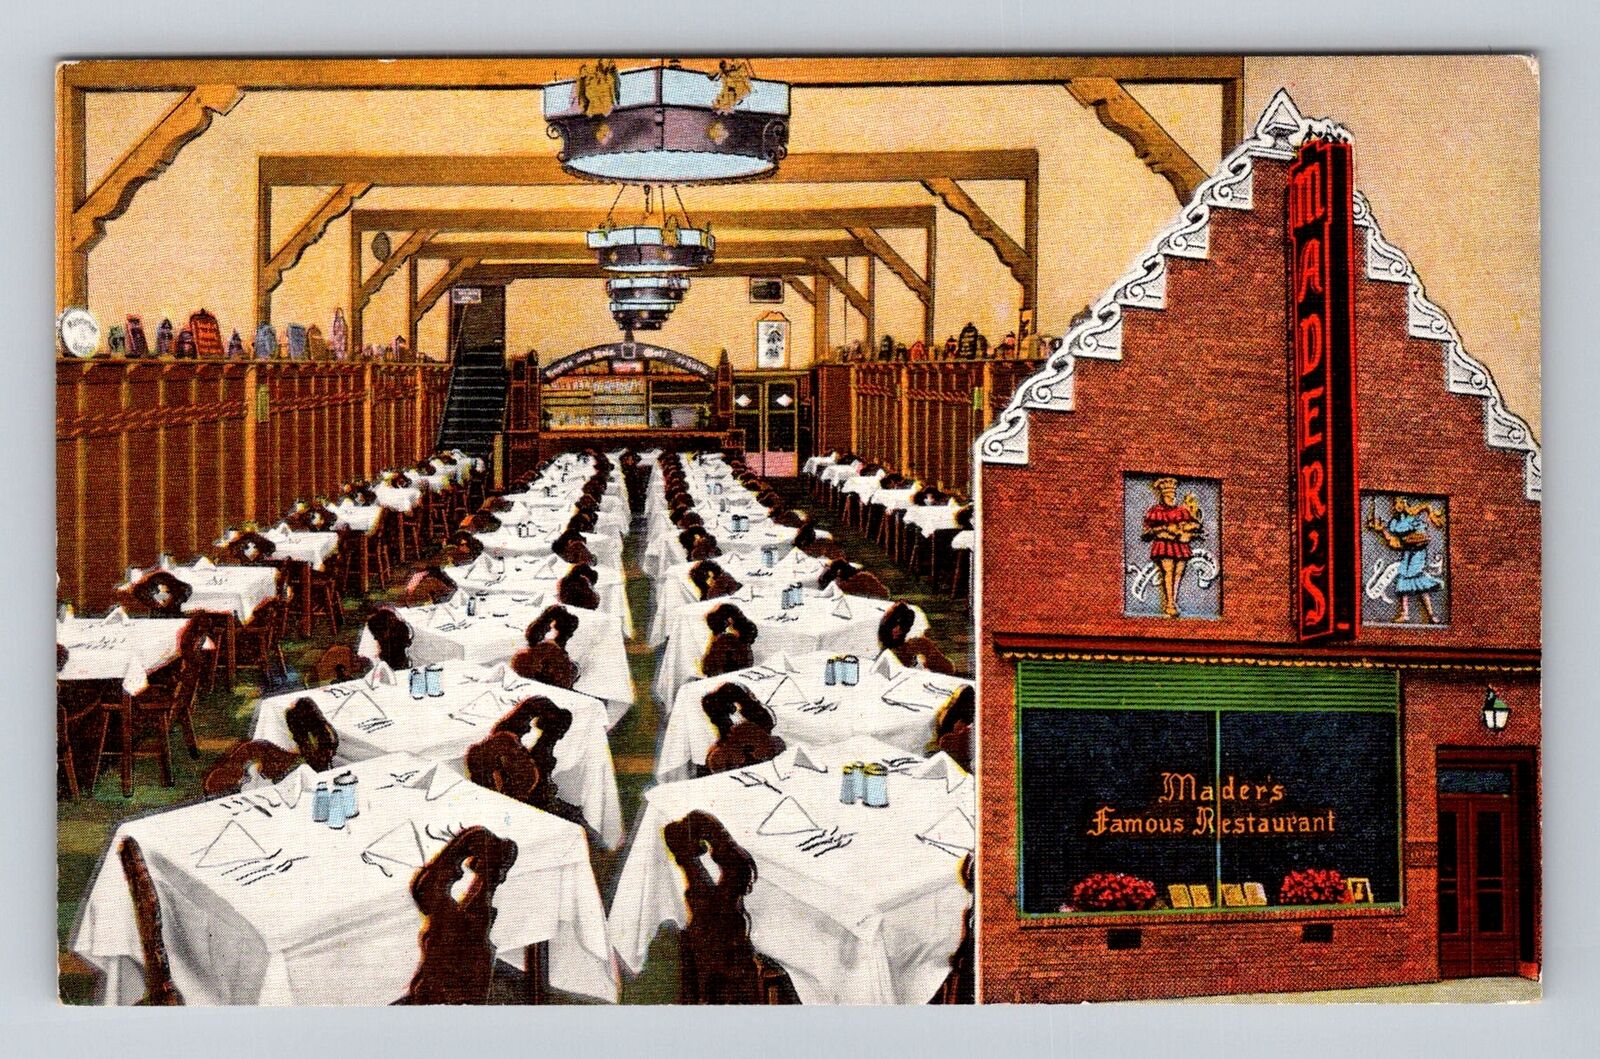 Milwaukee WI-Wisconsin, Mader's Famous Restaurant Advertising Vintage Postcard